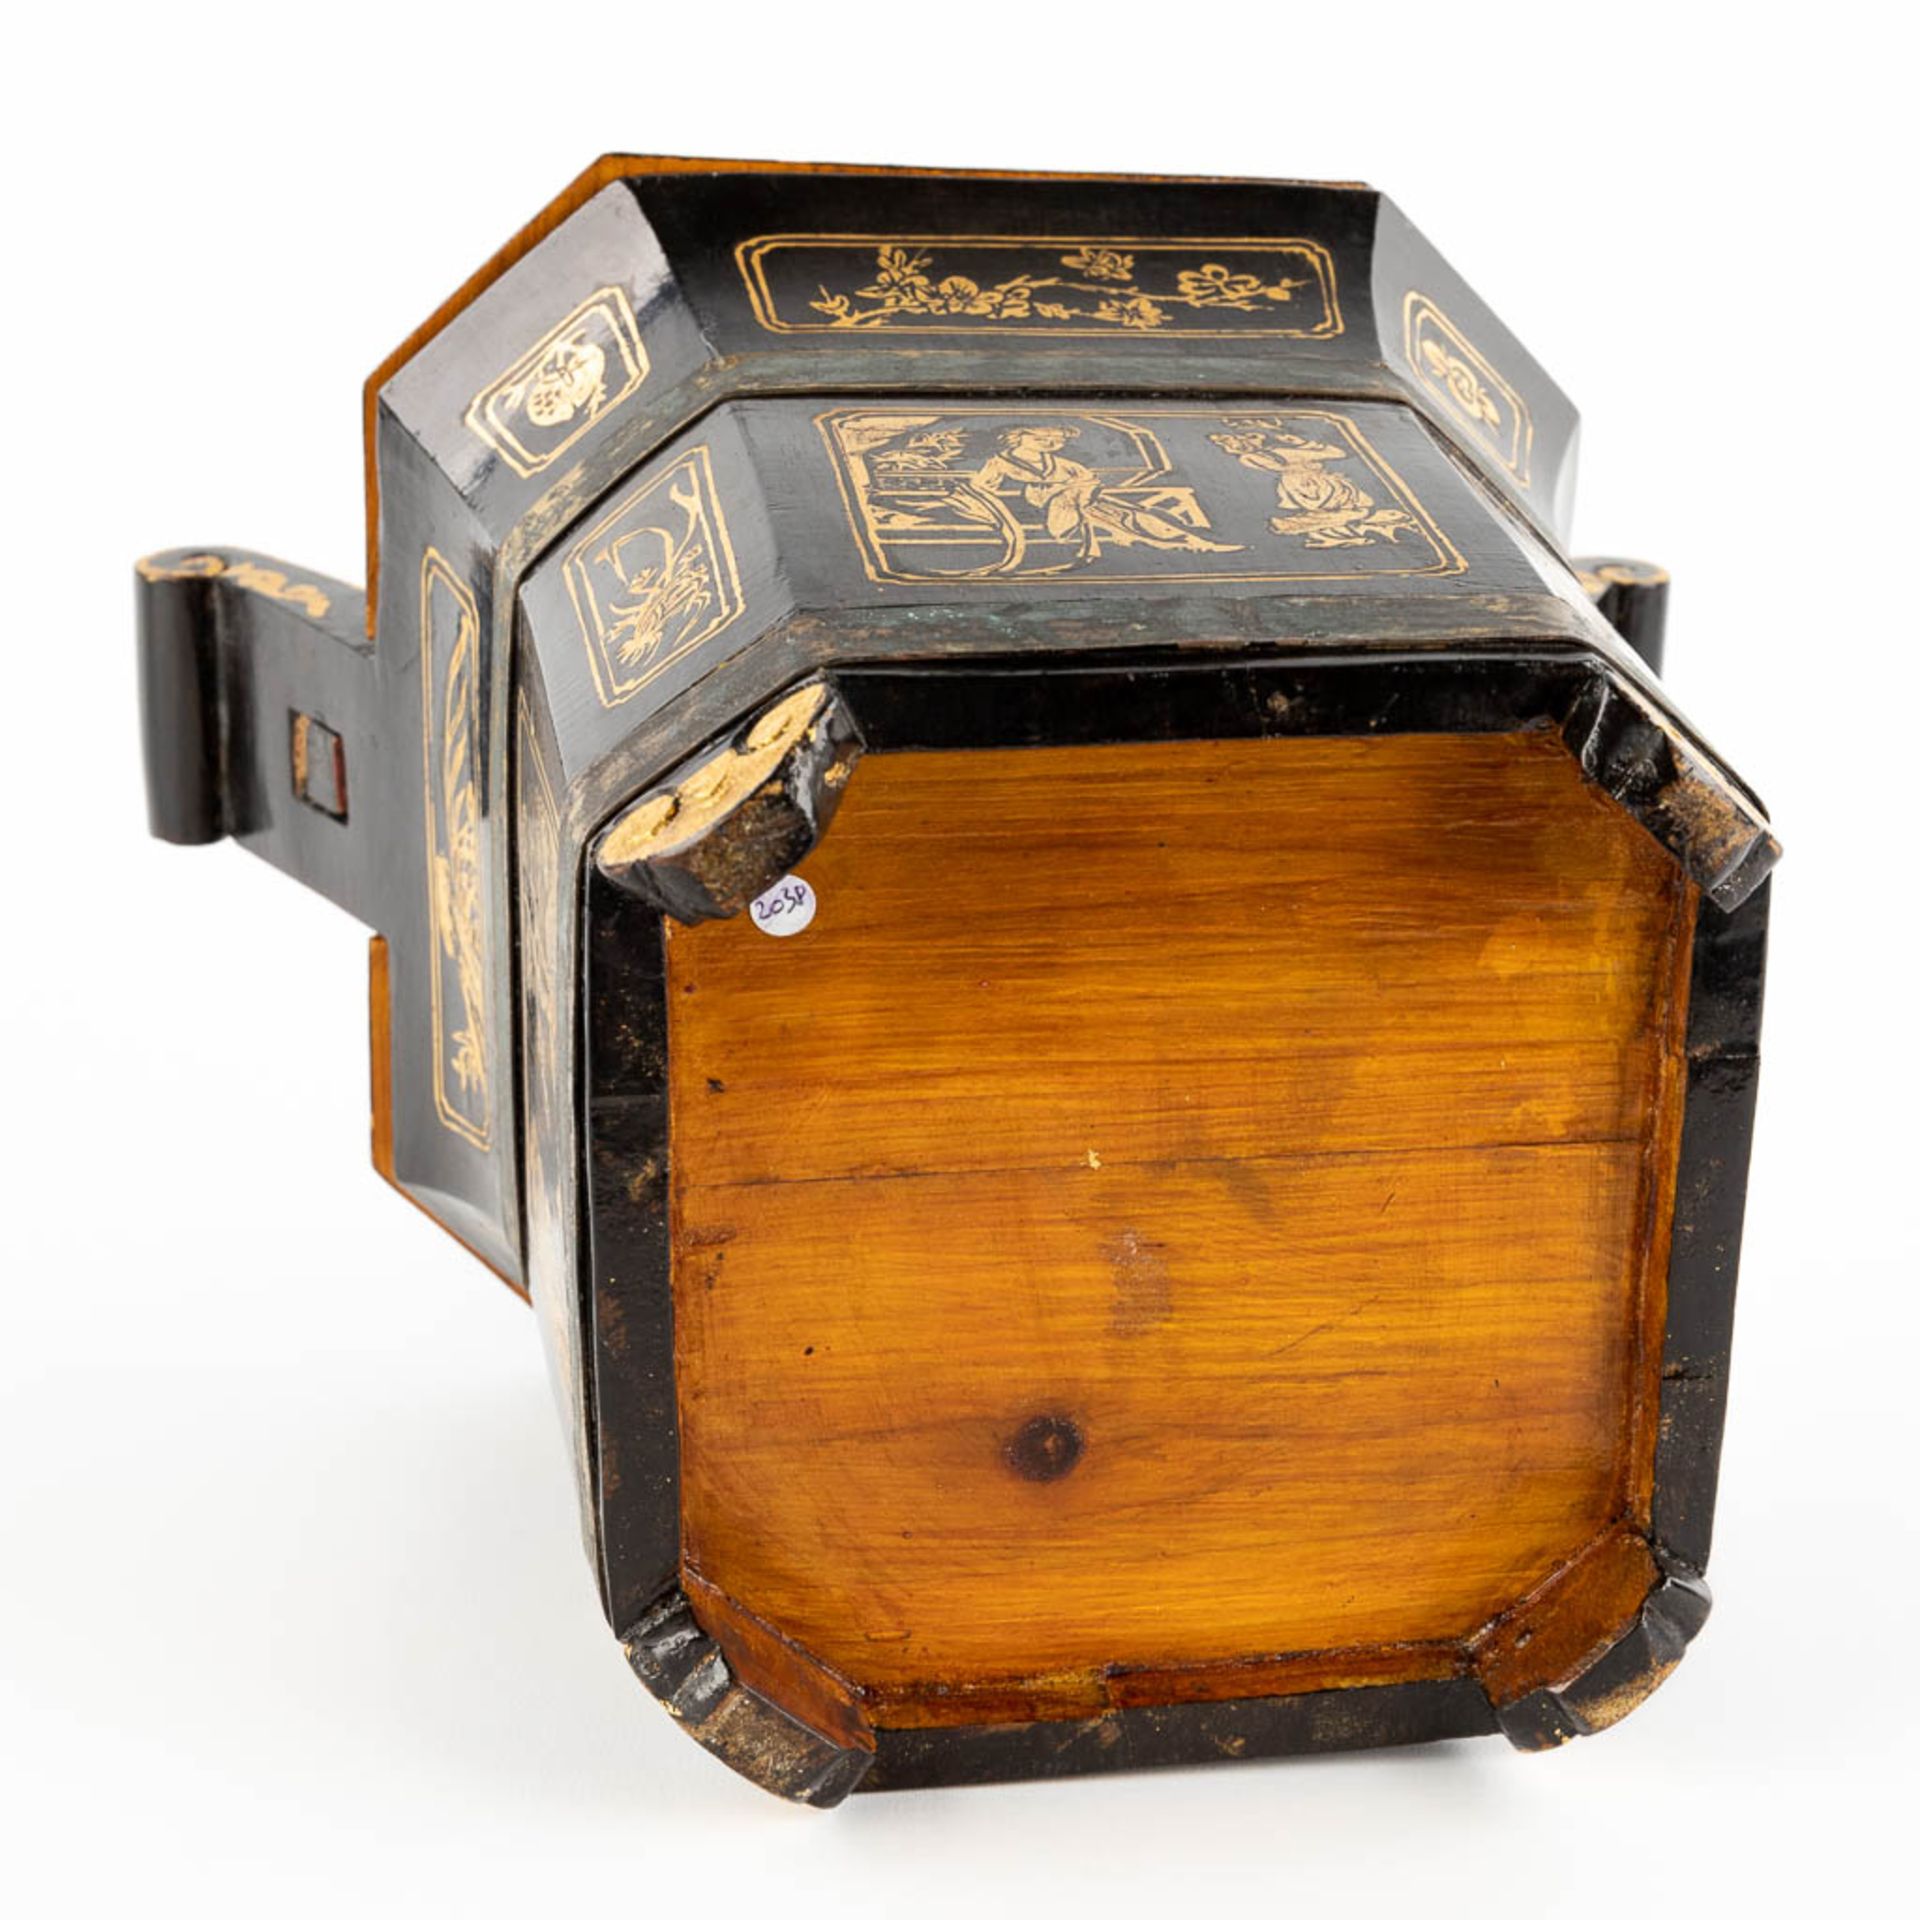 A Chinese carrying case for a teapot, gilt wood with lacquer and dragon figurines. 20th C. (D:24 x W - Image 7 of 16